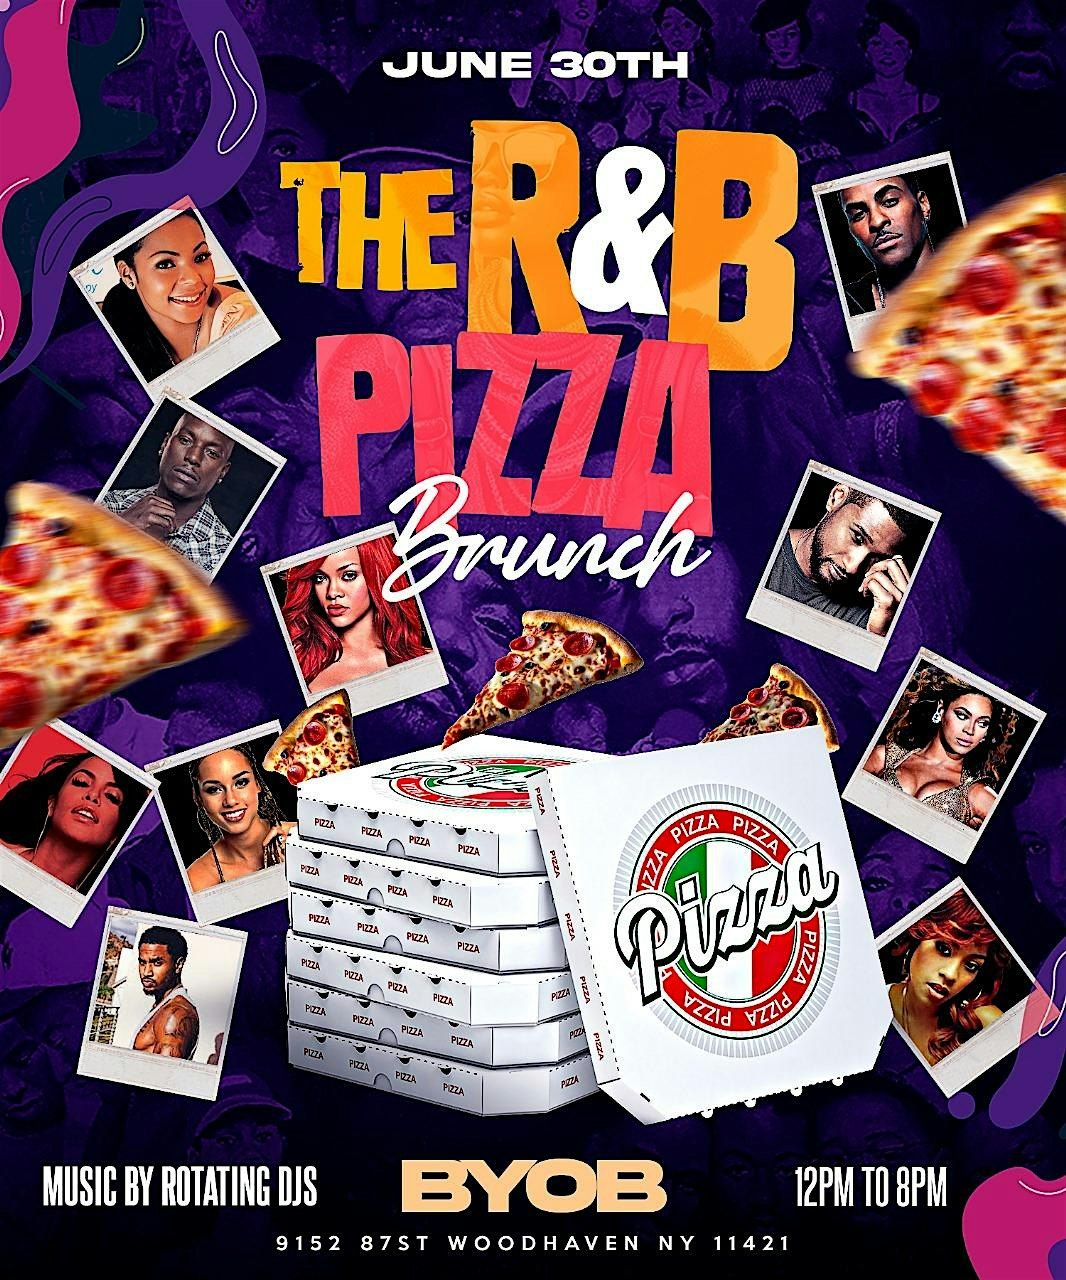 The R&B pizza brunch